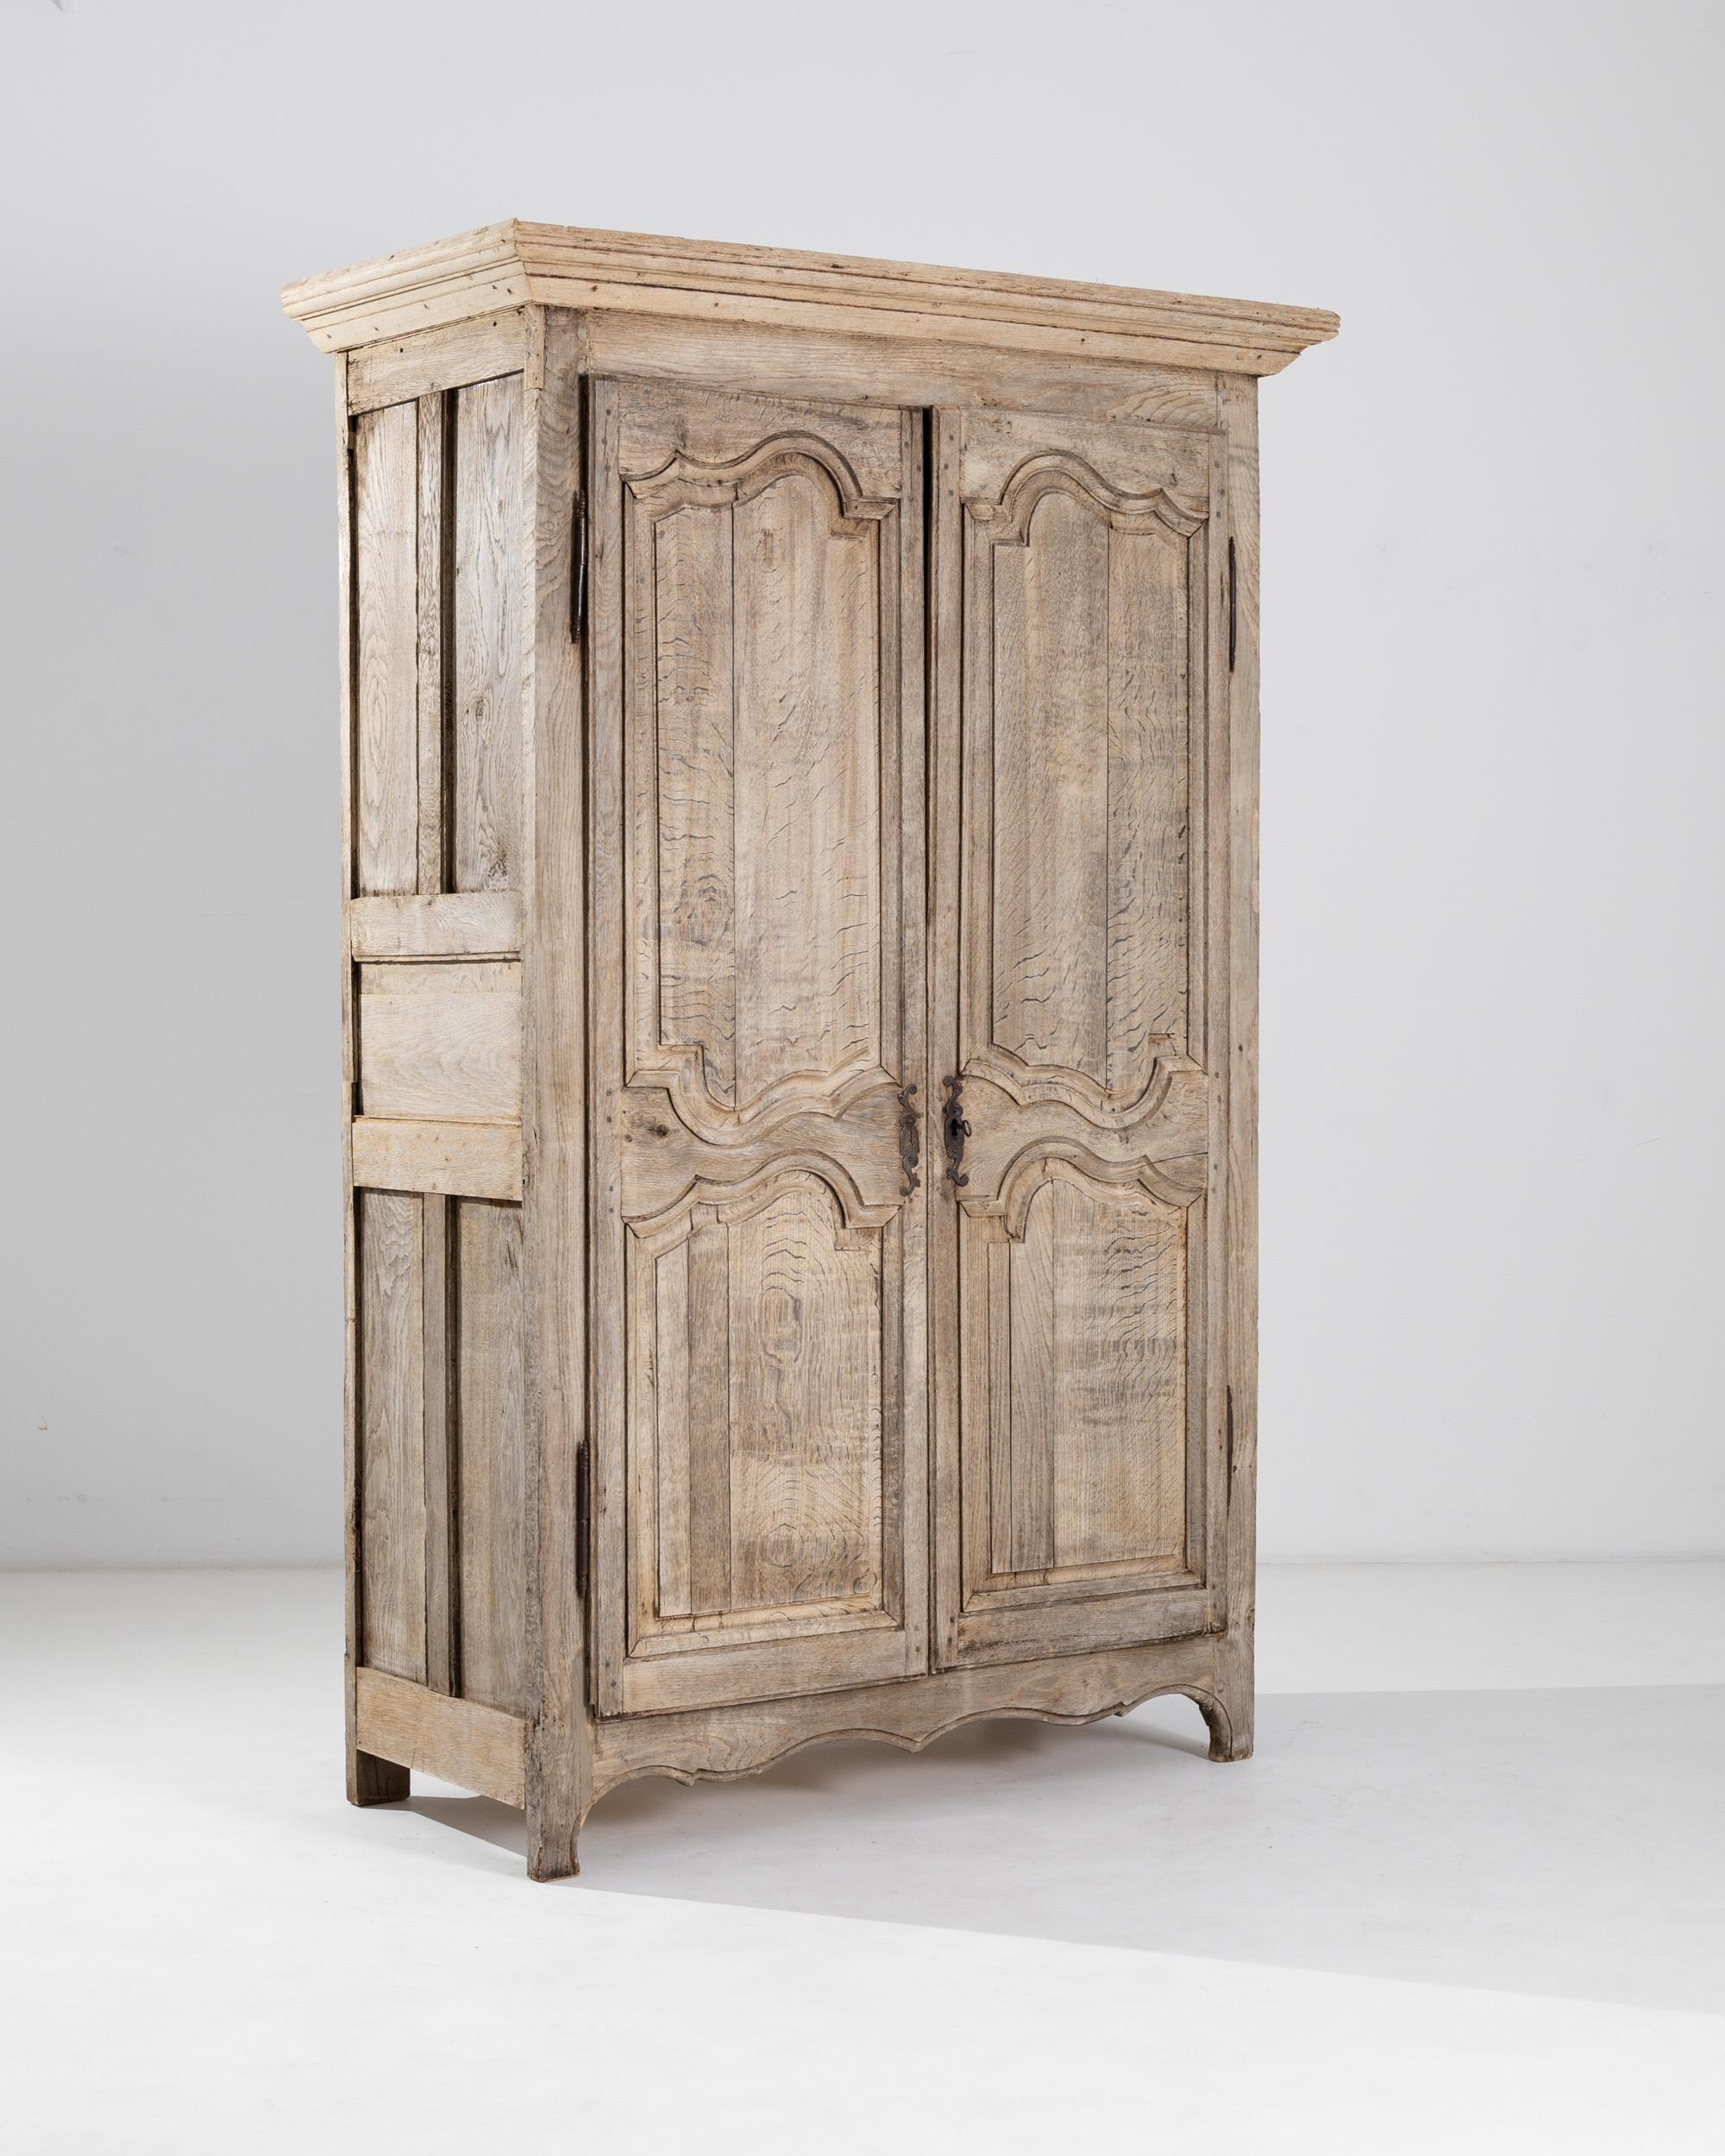 This antique wooden cabinet was produced in France, circa 1800. A tall cabinet standing on molded bracket feet and crowned by a cornice top, featuring an elegantly carved front and a scalloped apron. The wood has been carefully restored in our